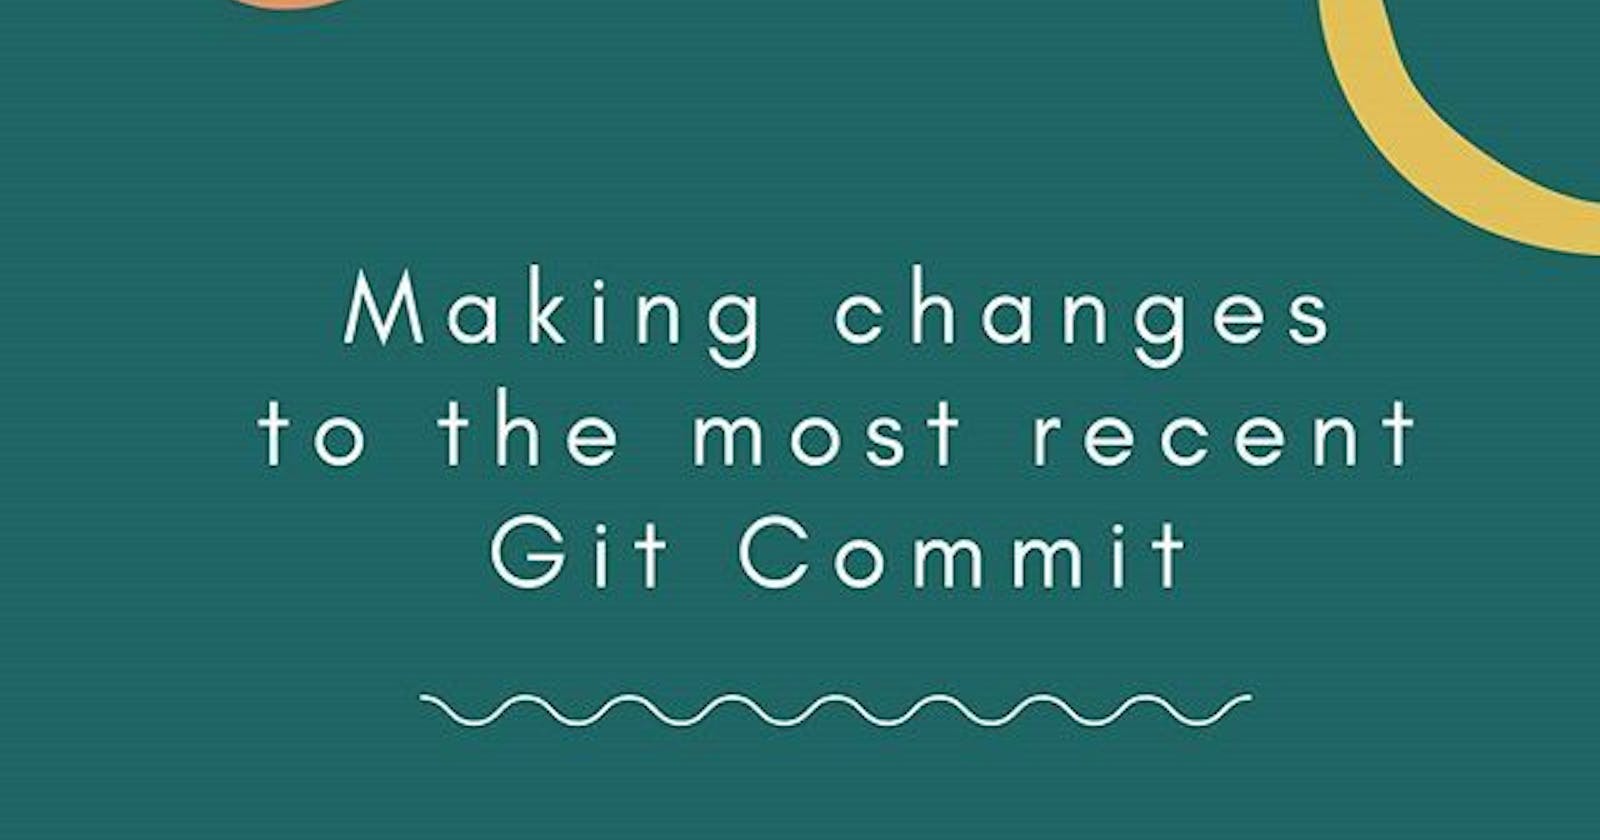 Making changes to the most recent git commit (Learning about git amend)